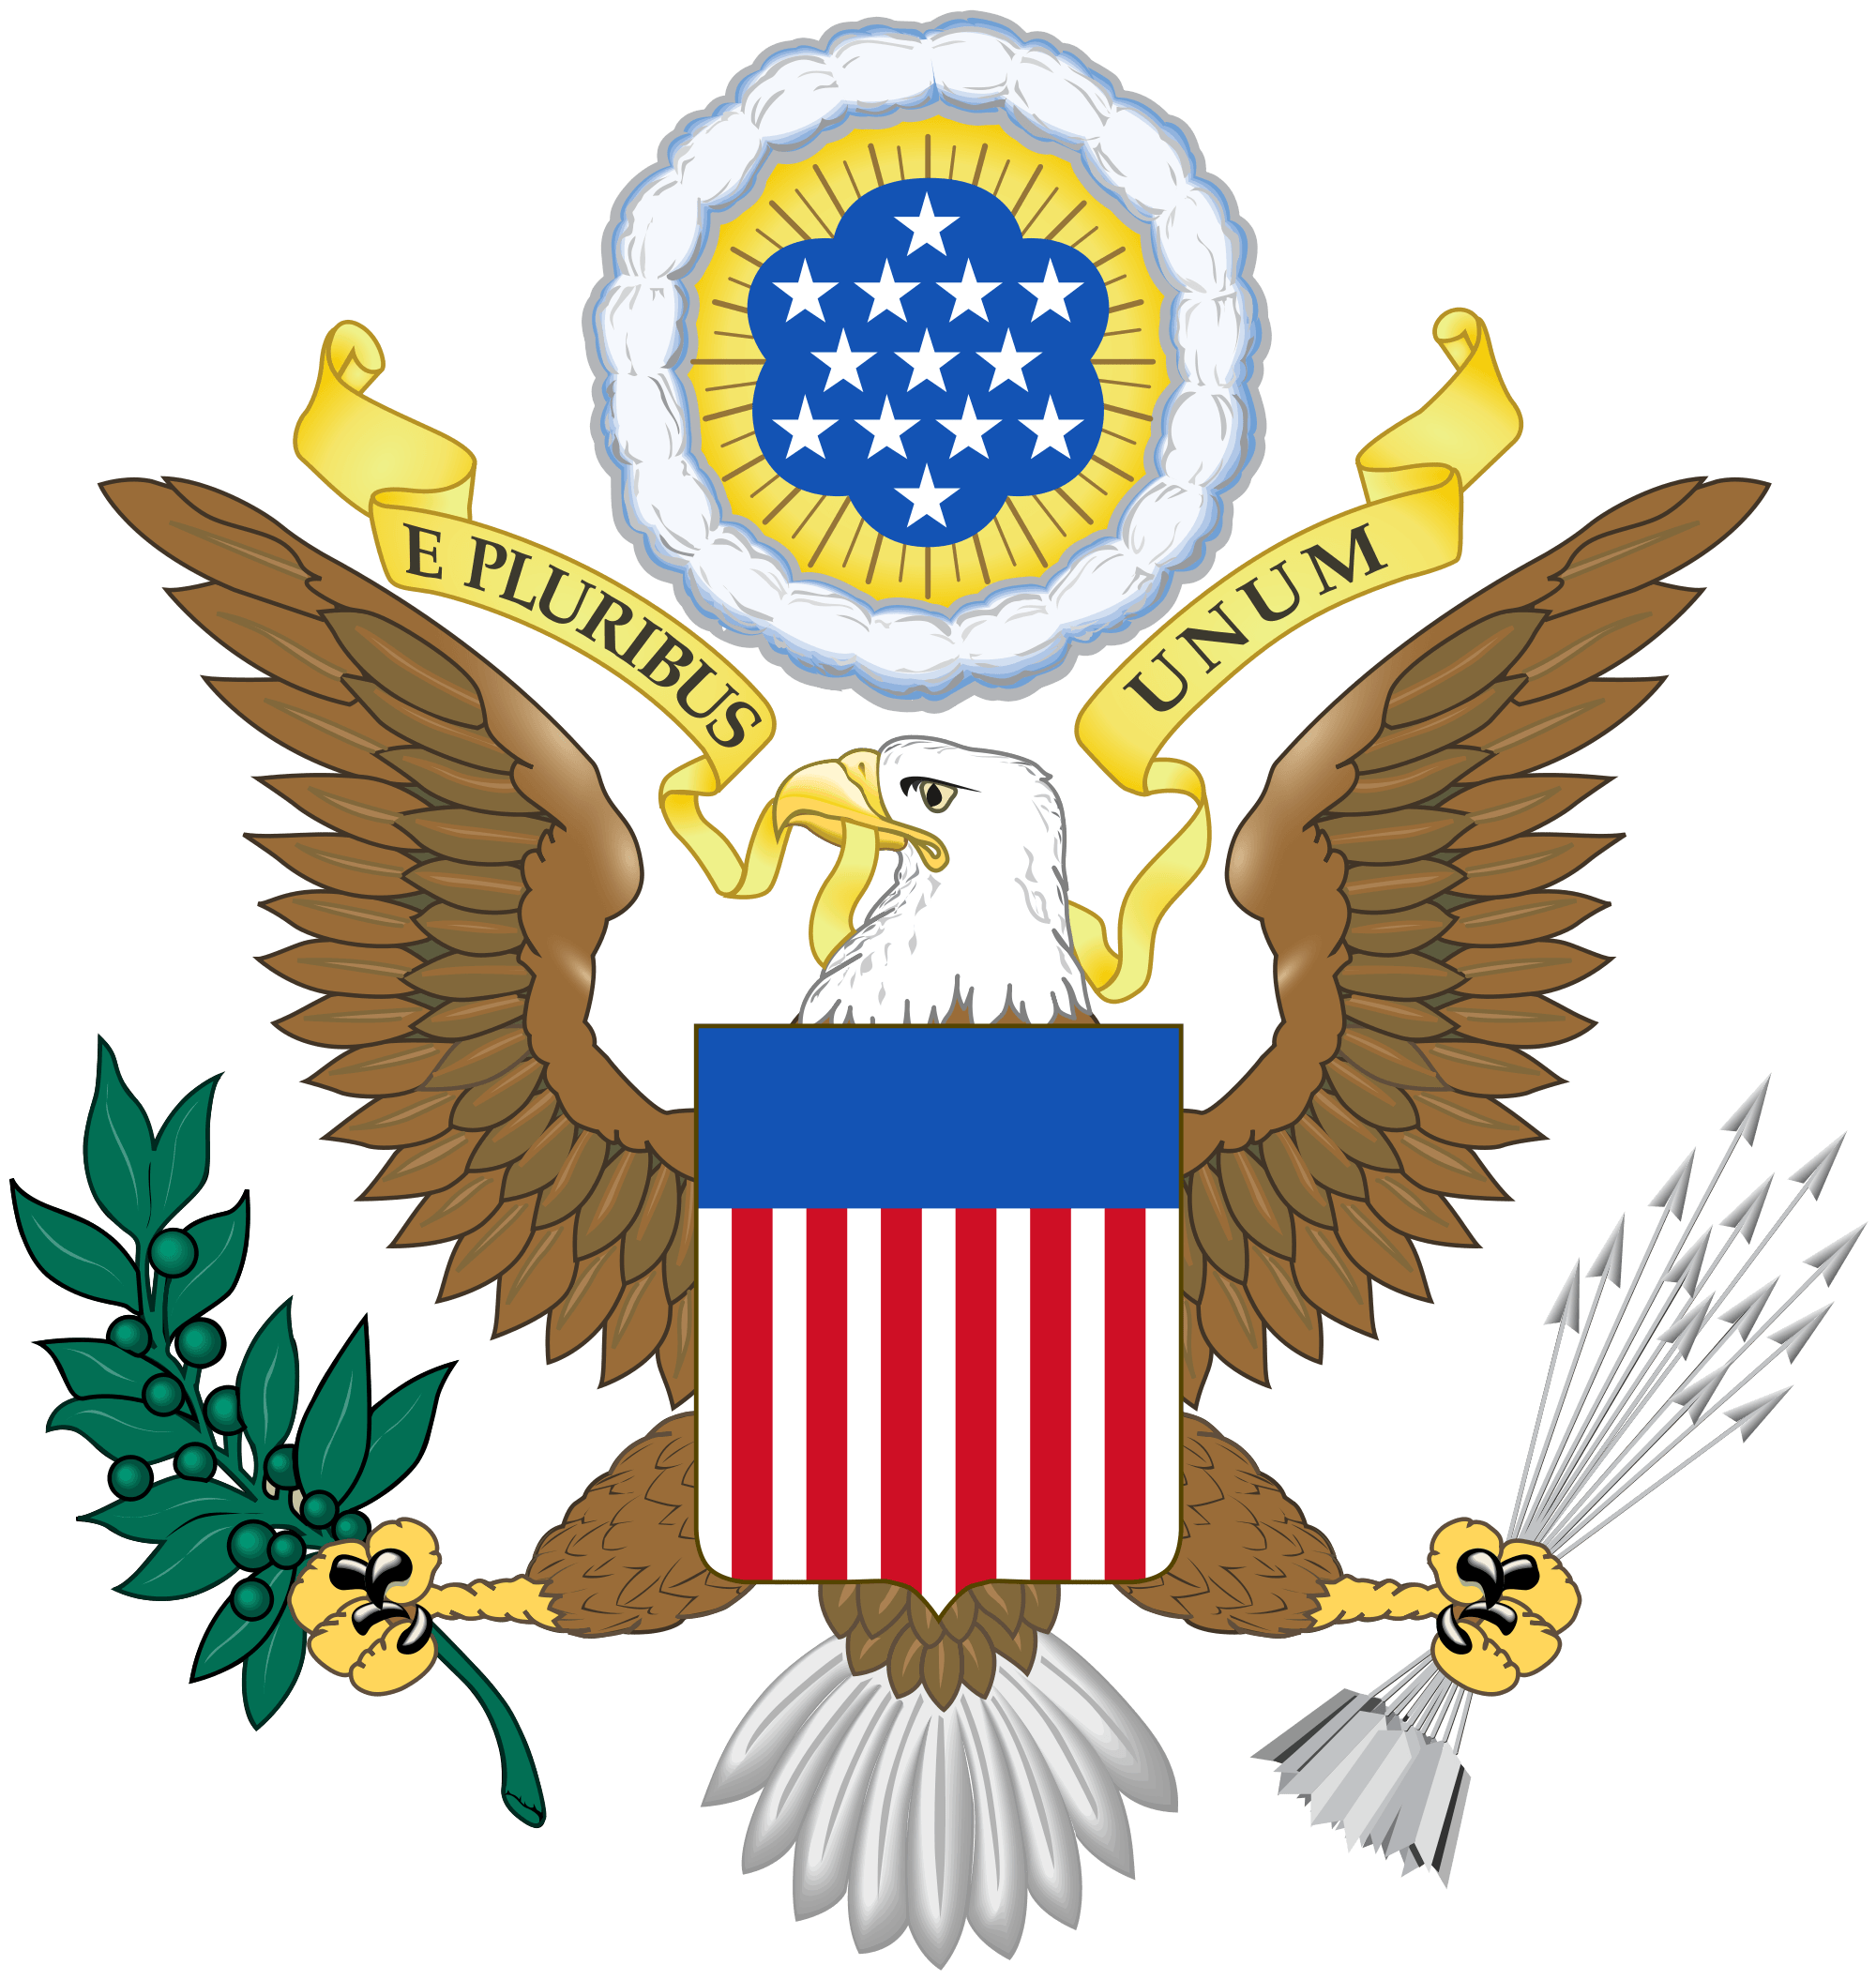 United States Eagle Logo - Great Seal of the United States